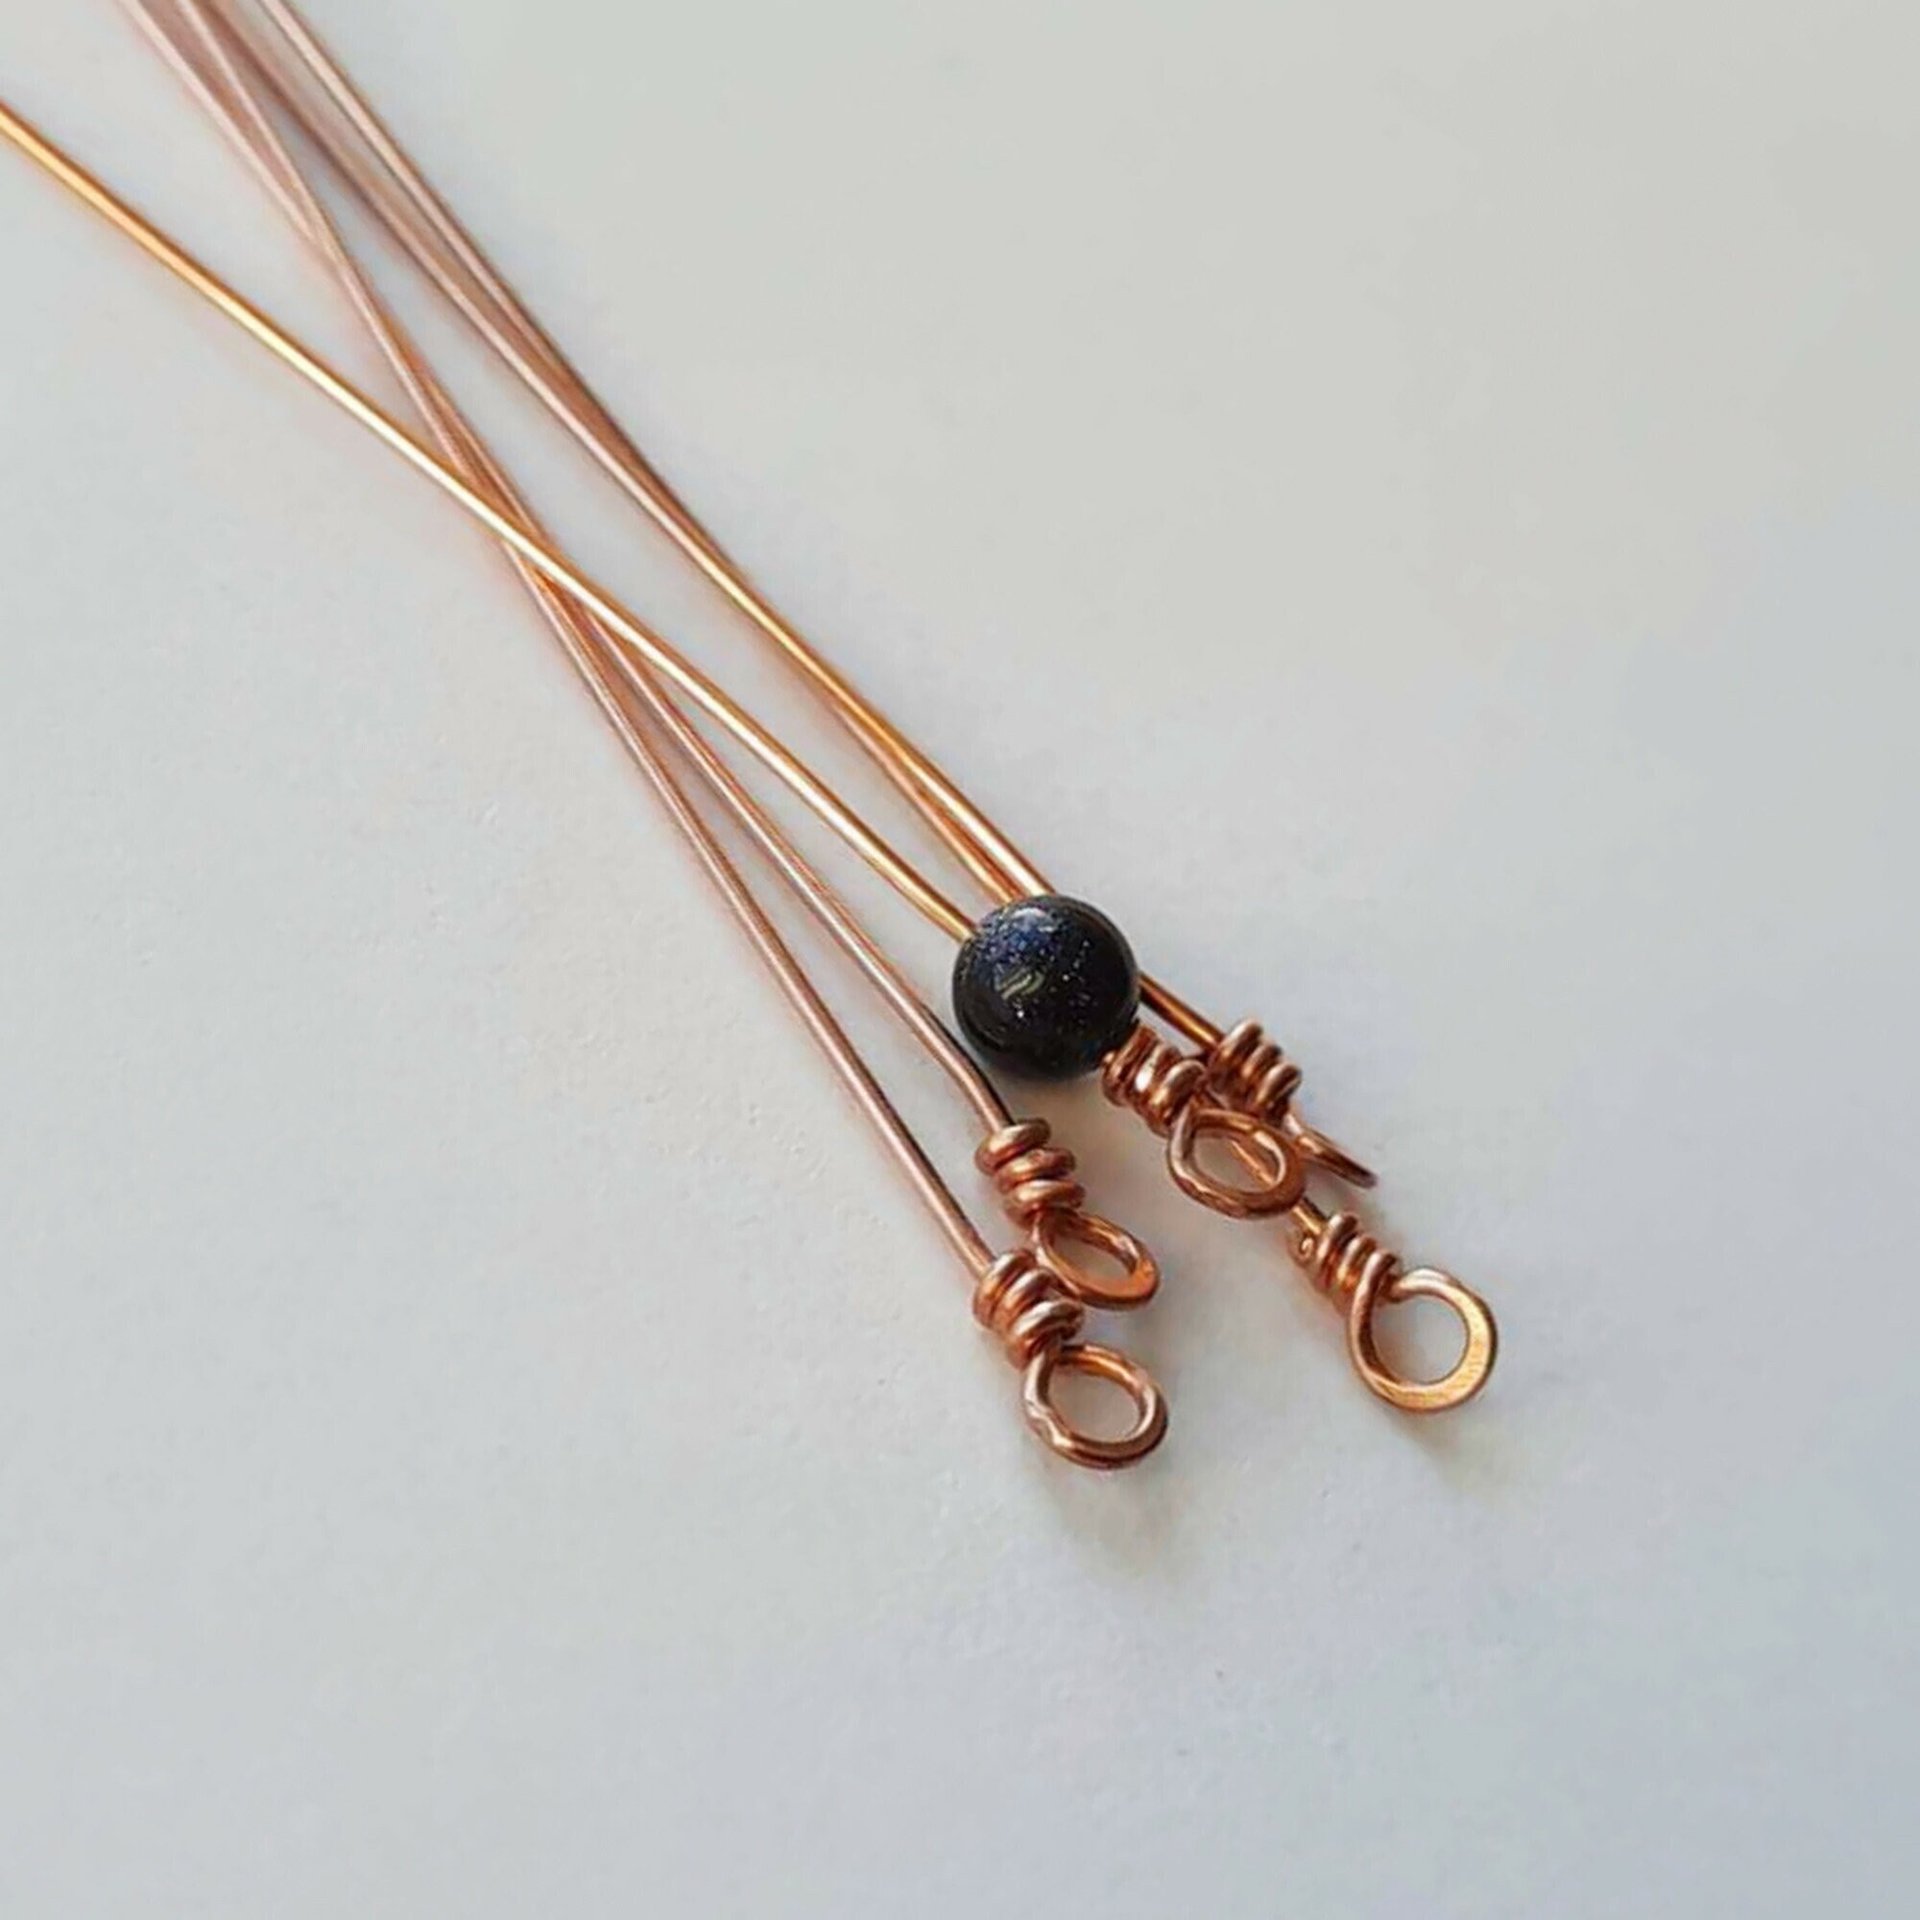 Wire Wrapped Closed Loop Copper Eyepins ~ Handcrafted by The Tiny Tree Frog Jewellery